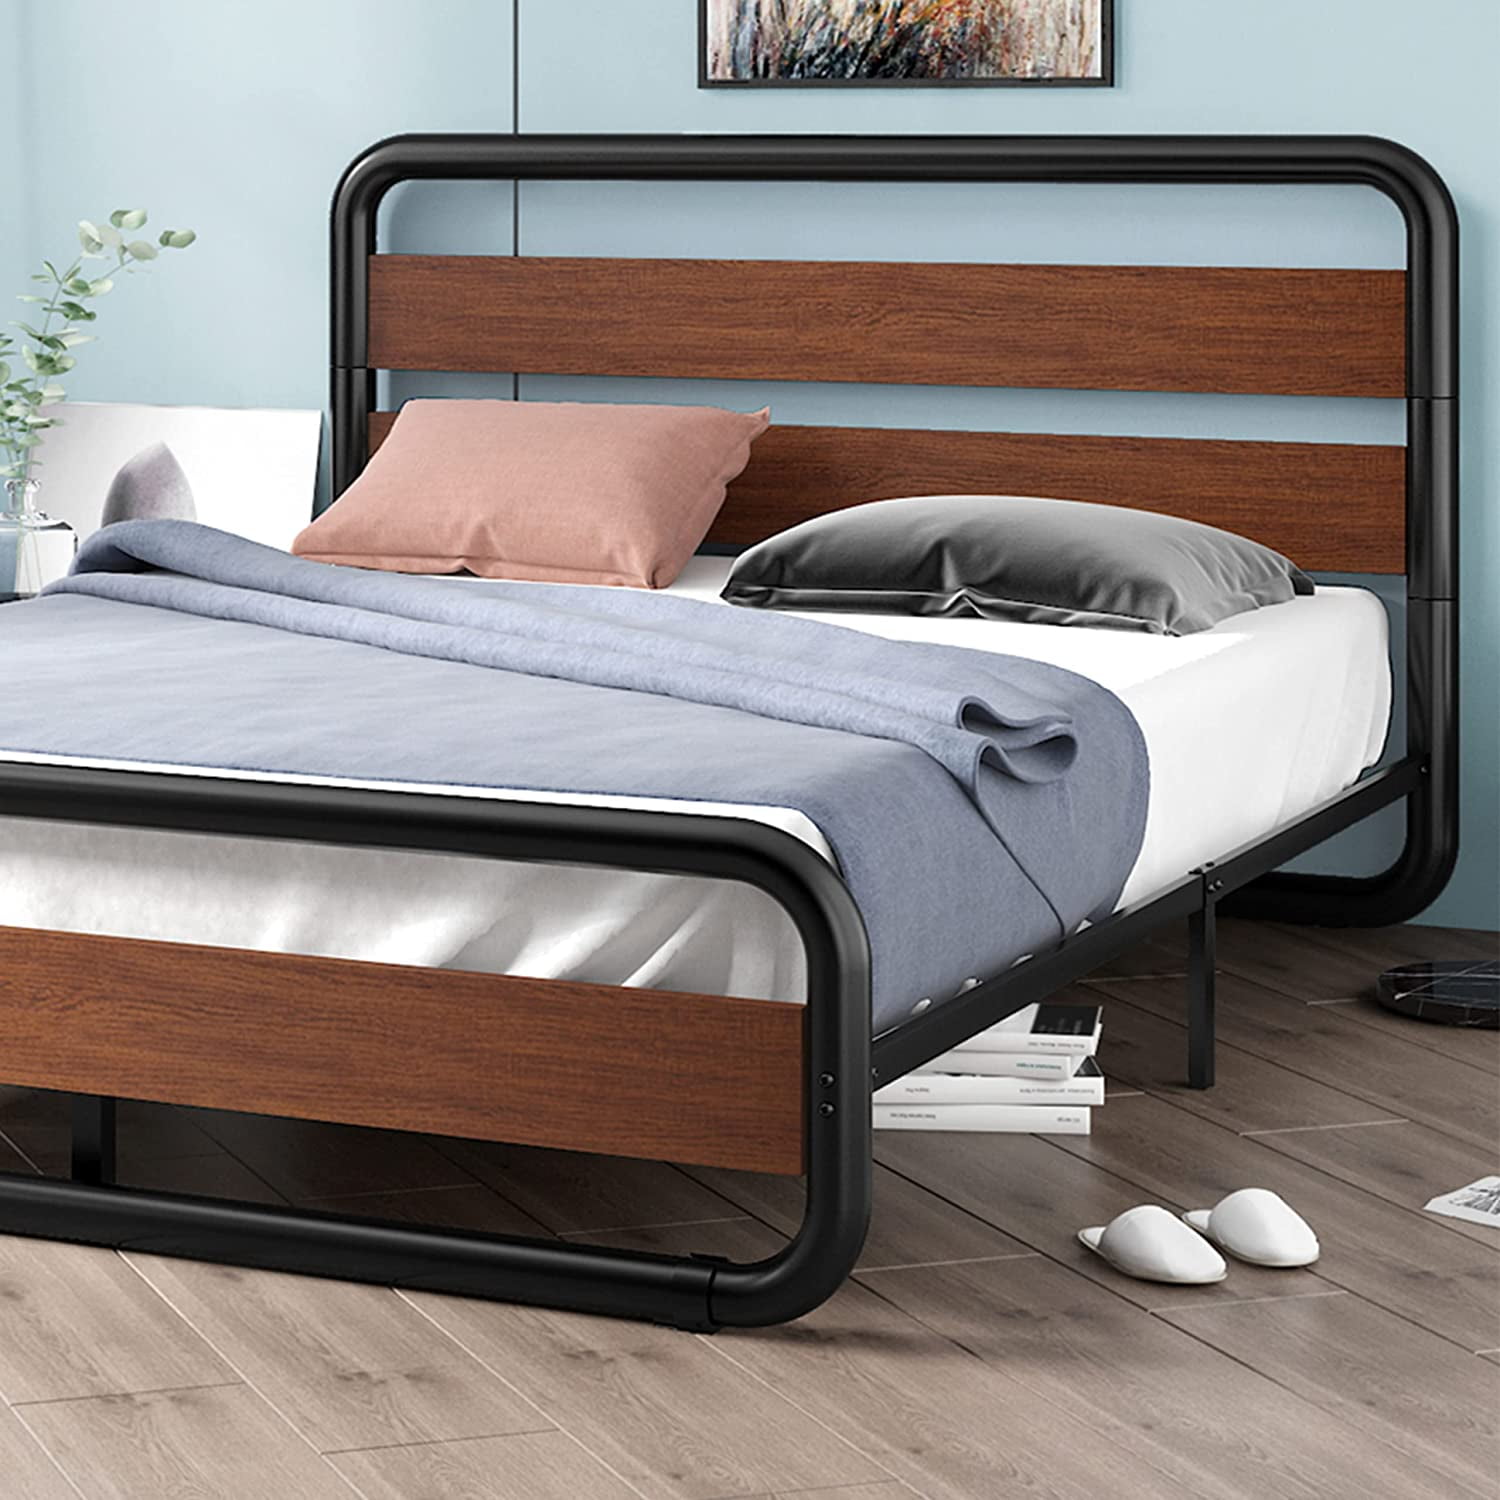 Sha Cerlin Full Size Heavy Duty Oval-Shaped Platform Bed Frame with